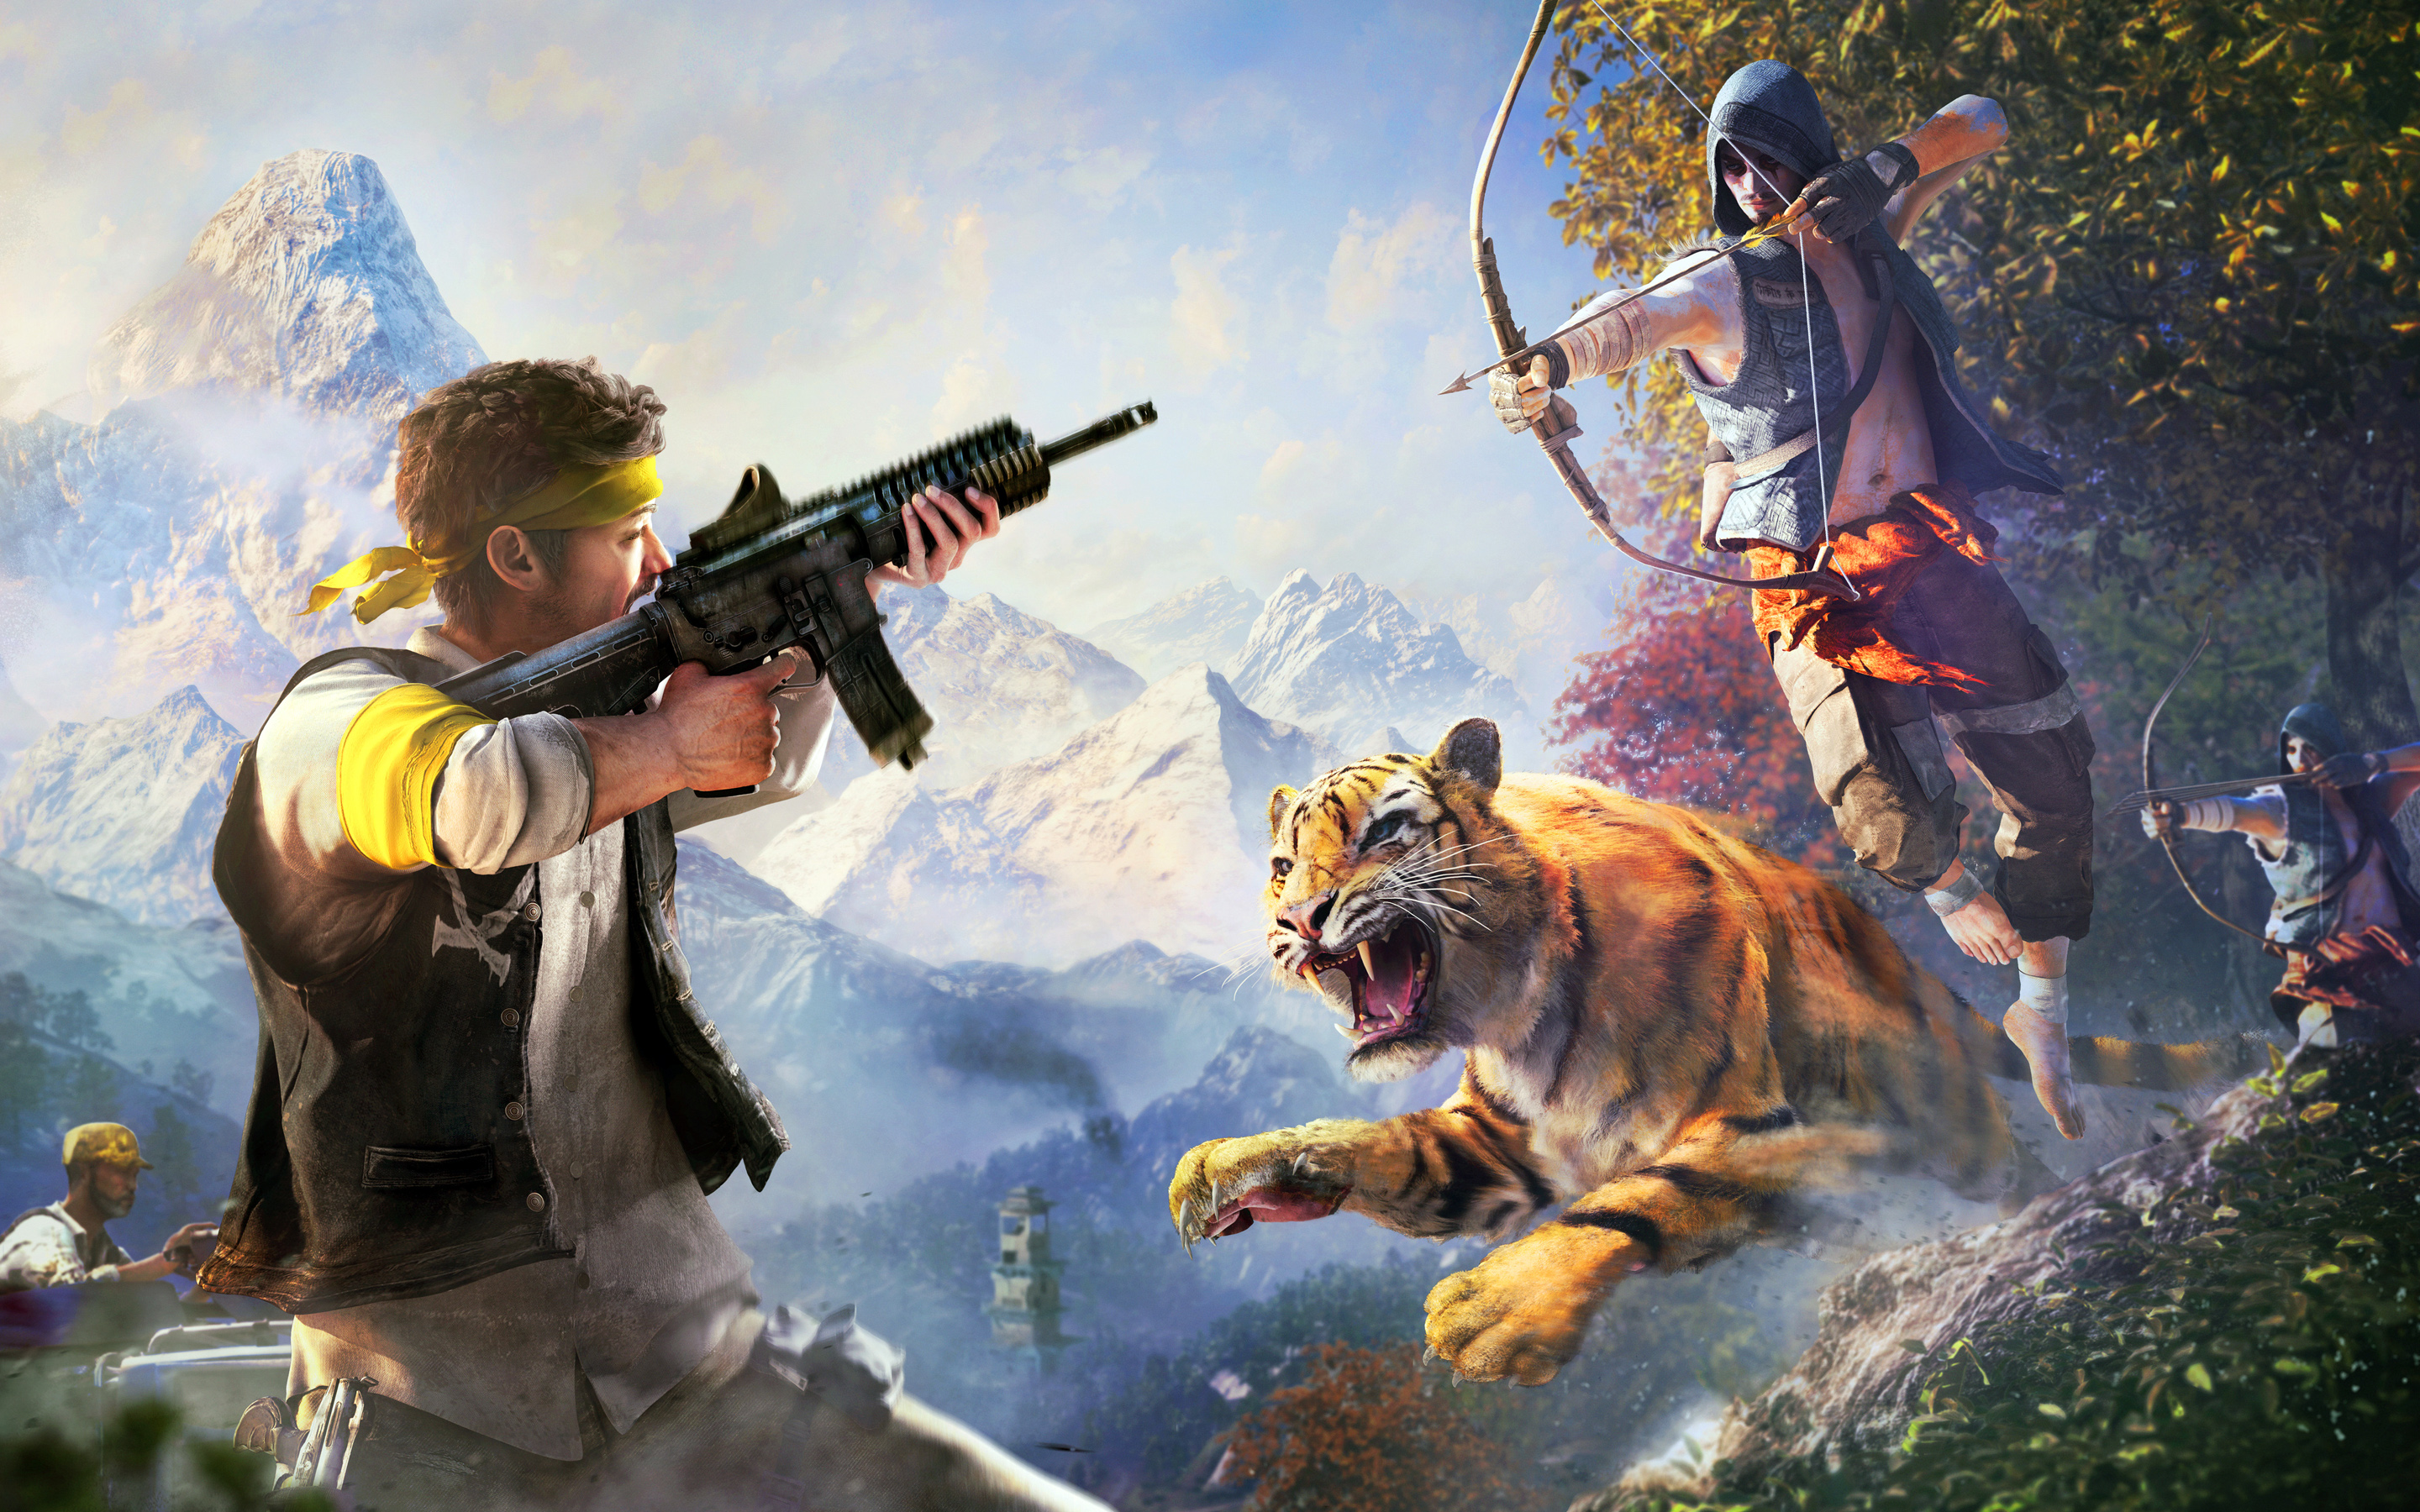 Wallpaper : 1920x2235 px, Far Cry 4 1920x2235 - CoolWallpapers - 1061966 -  HD Wallpapers - WallHere